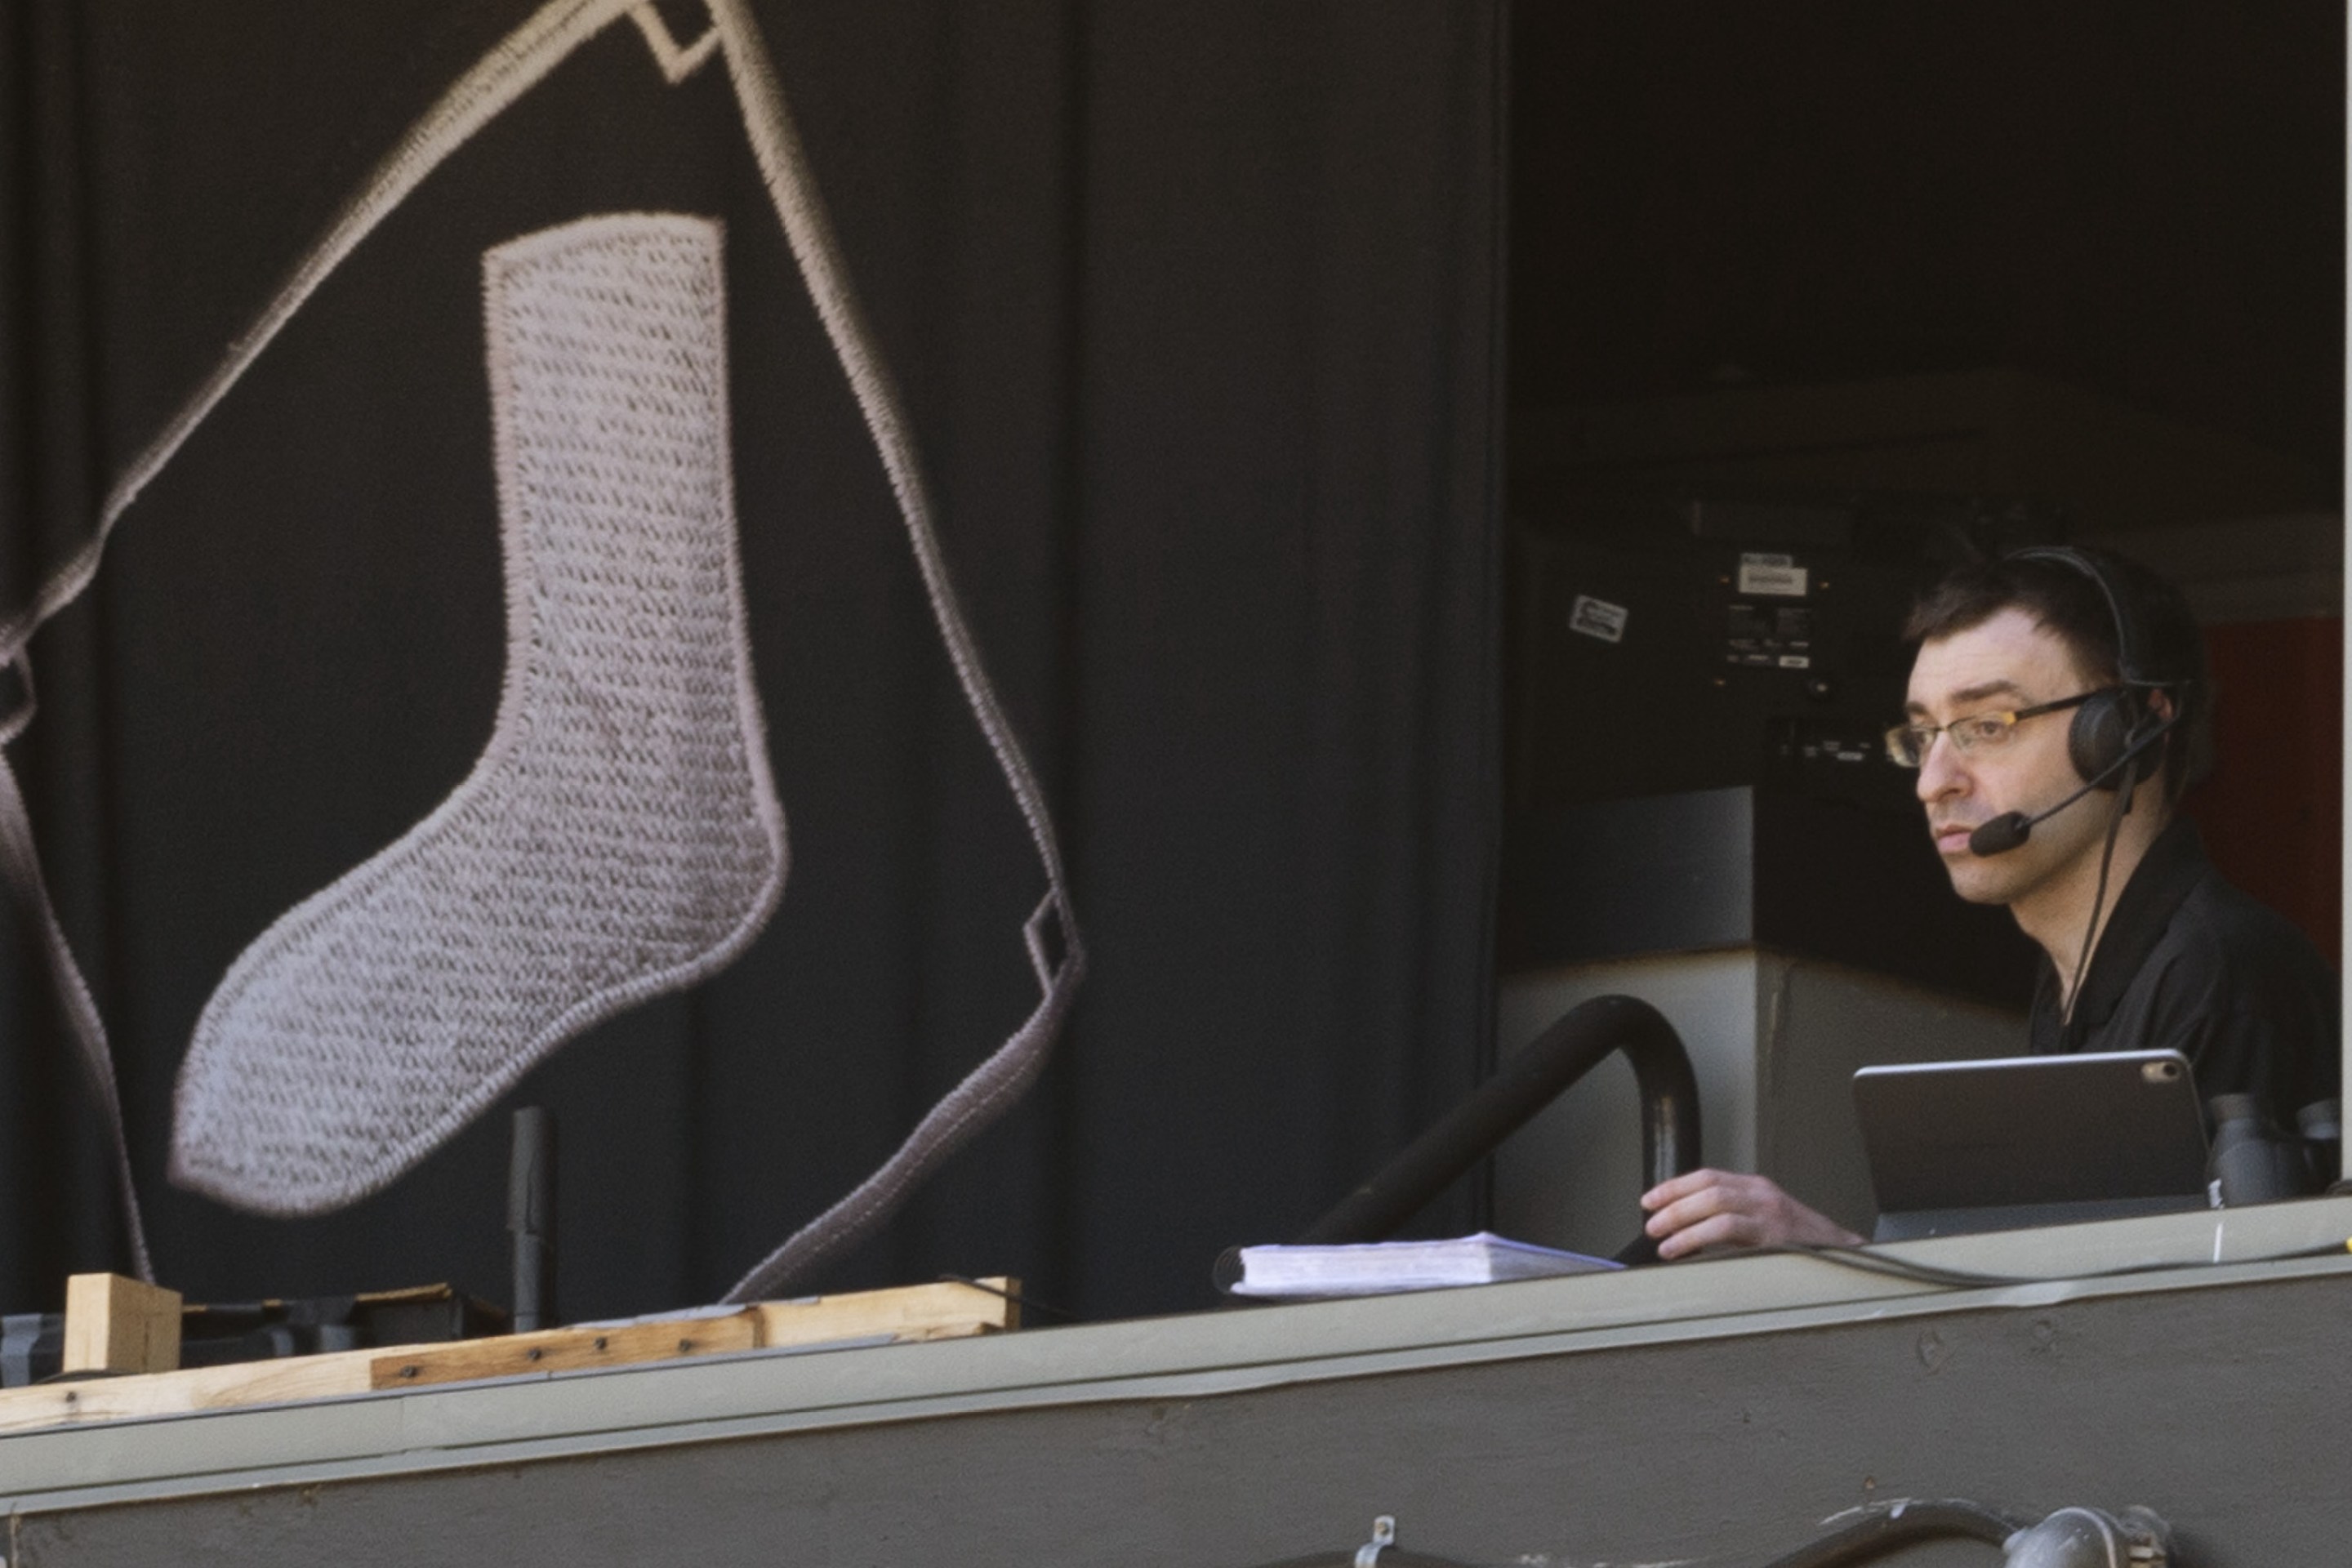 Jason Benetti looks on from the White Sox broadcasting booth.